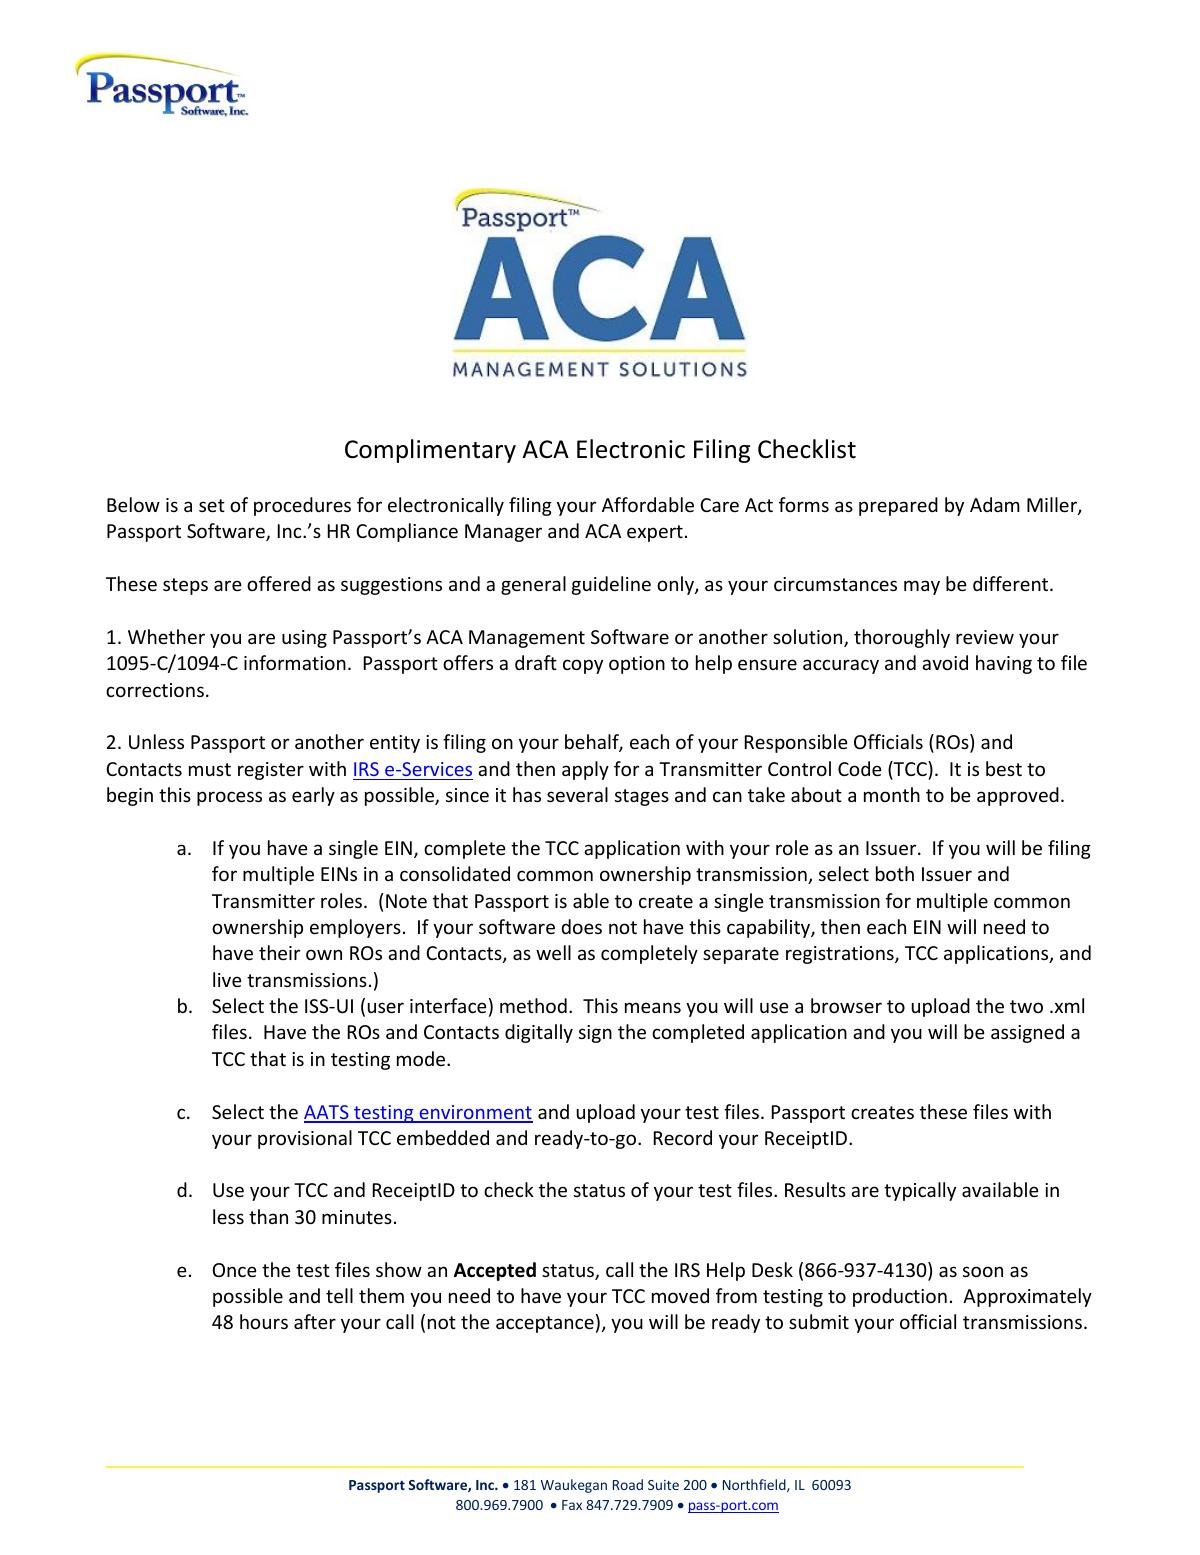 Complimentary ACA Electronic Filing Checklist